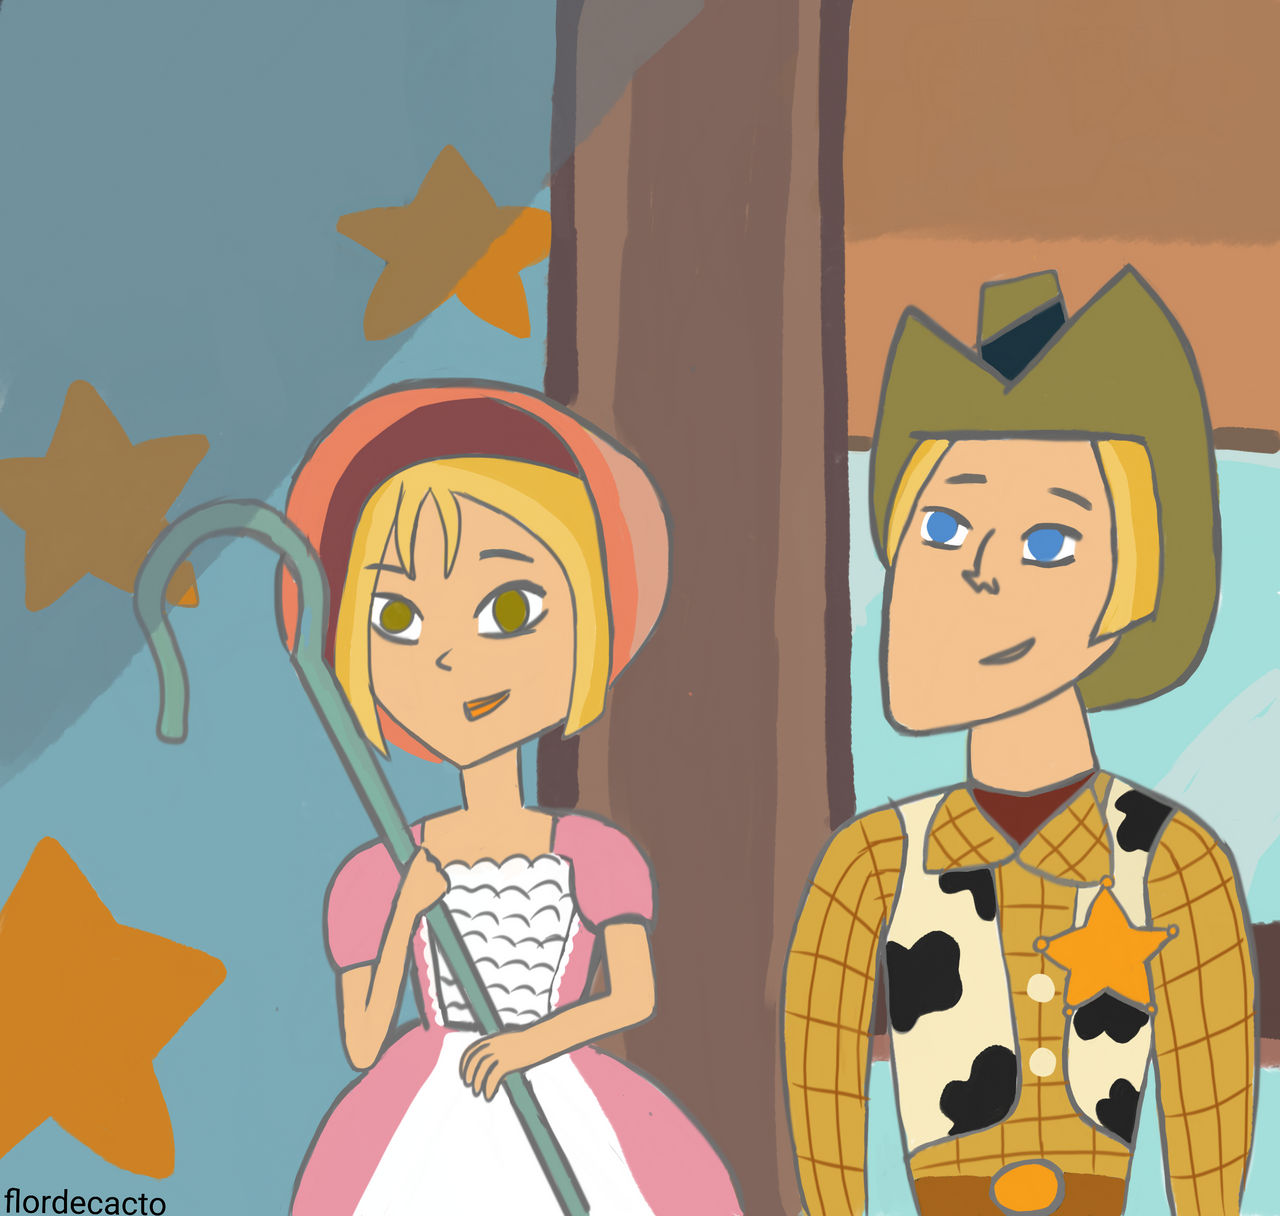 Total drama story by FlordeCacto on DeviantArt